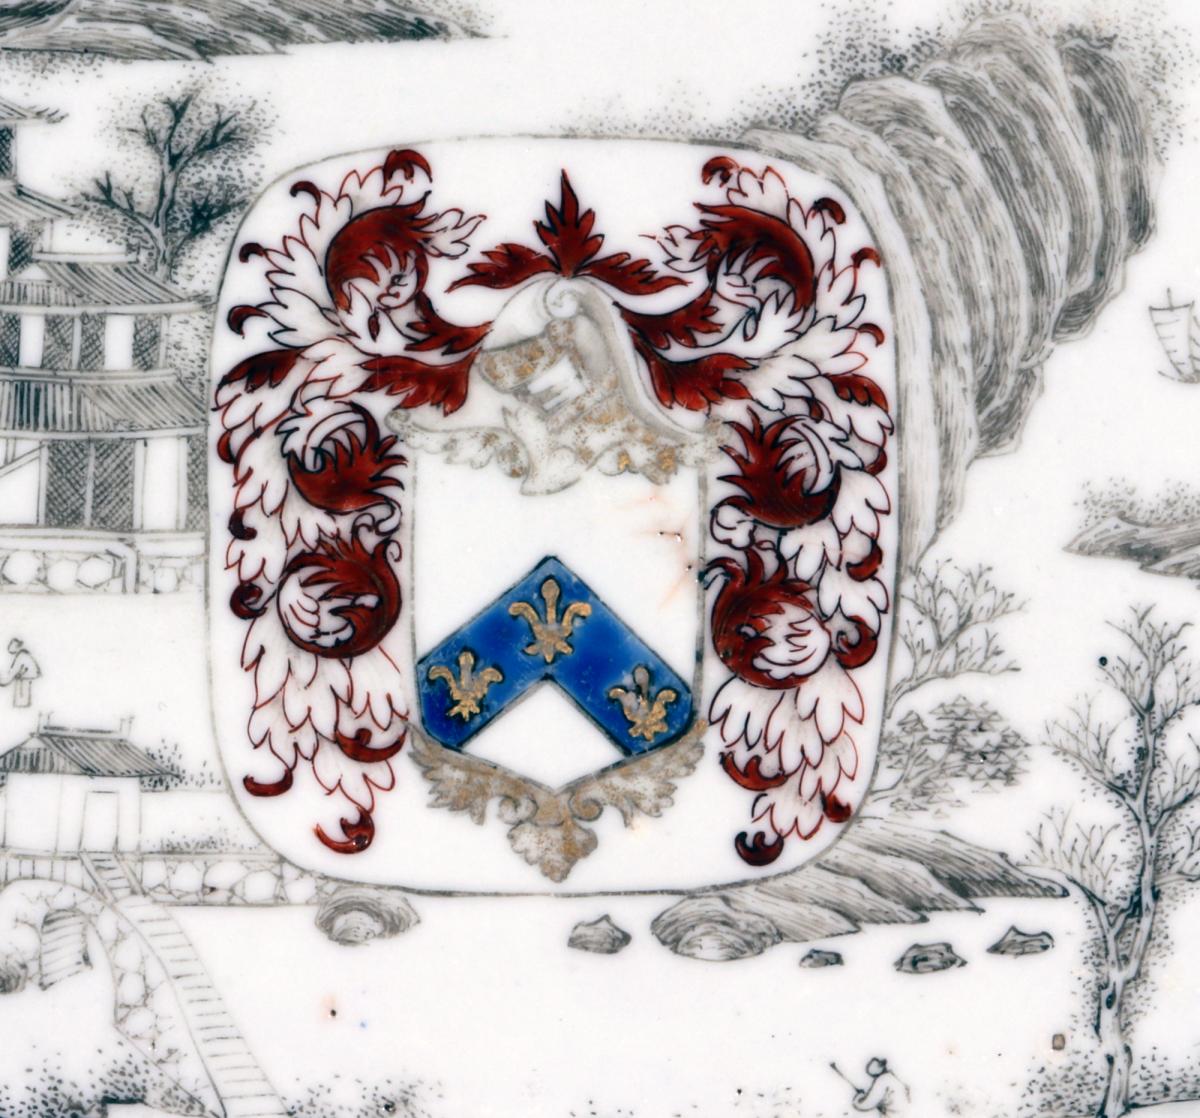 18th-century Yongzheng Chinese Export Porcelain Plate with Arms of Elwick of Middlesex